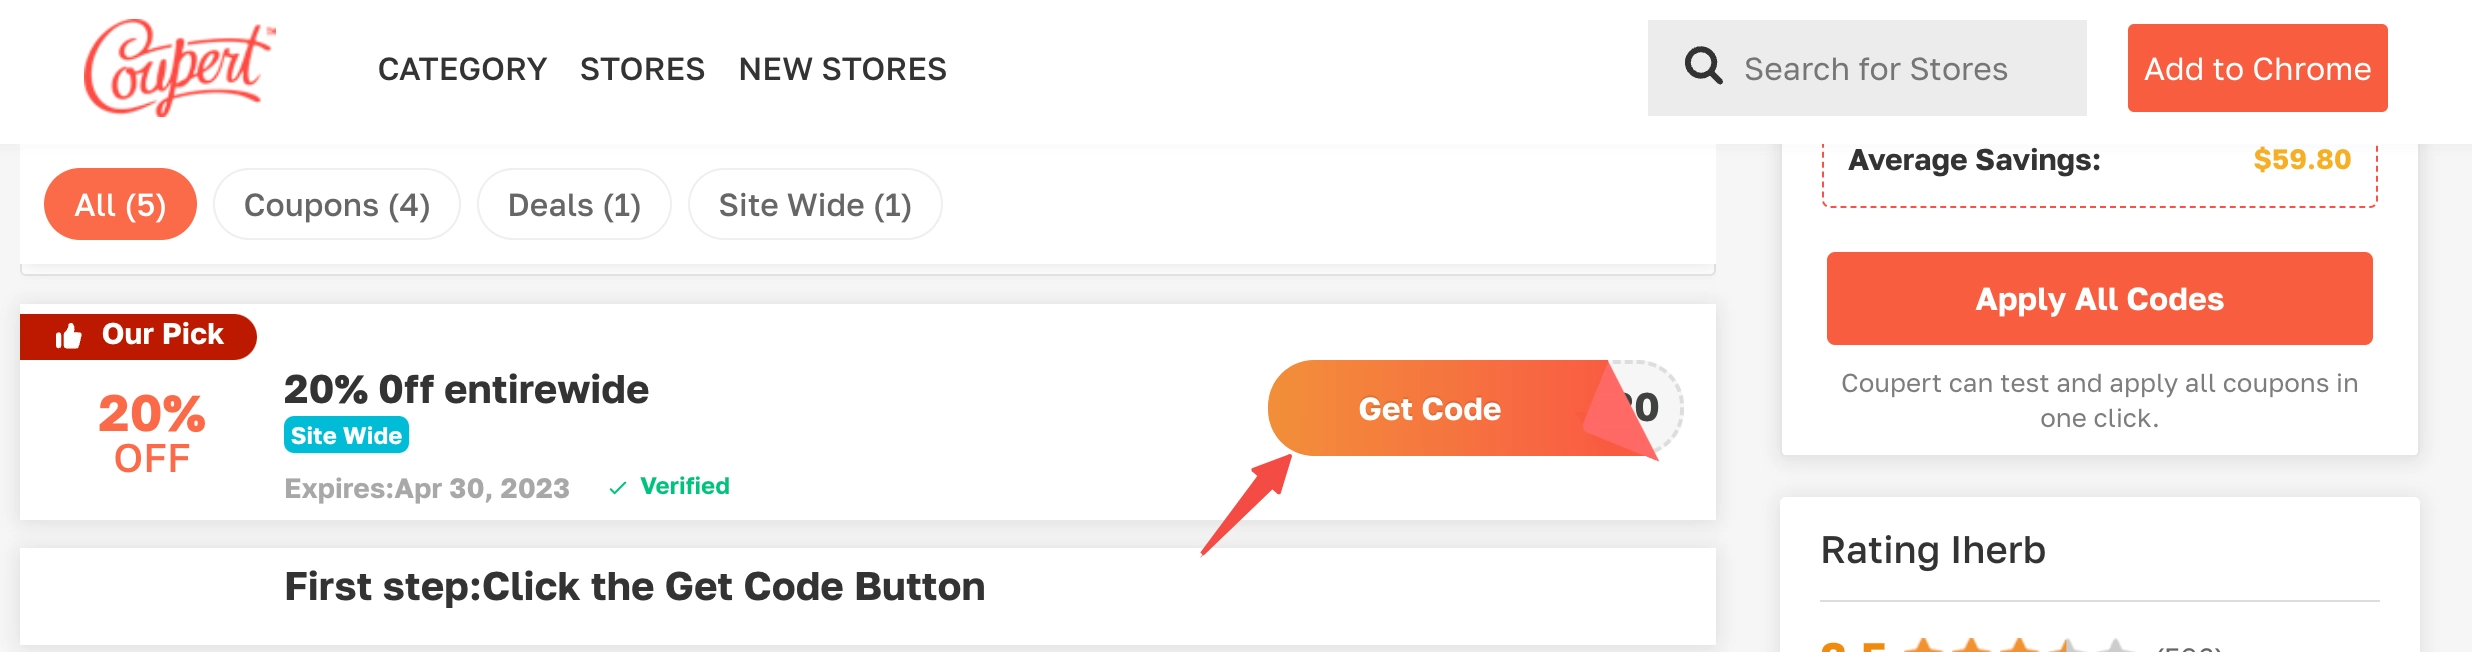 Step 1:  Select Pip And Sox Discount Code and click on "Get Code" or "Get Deal".